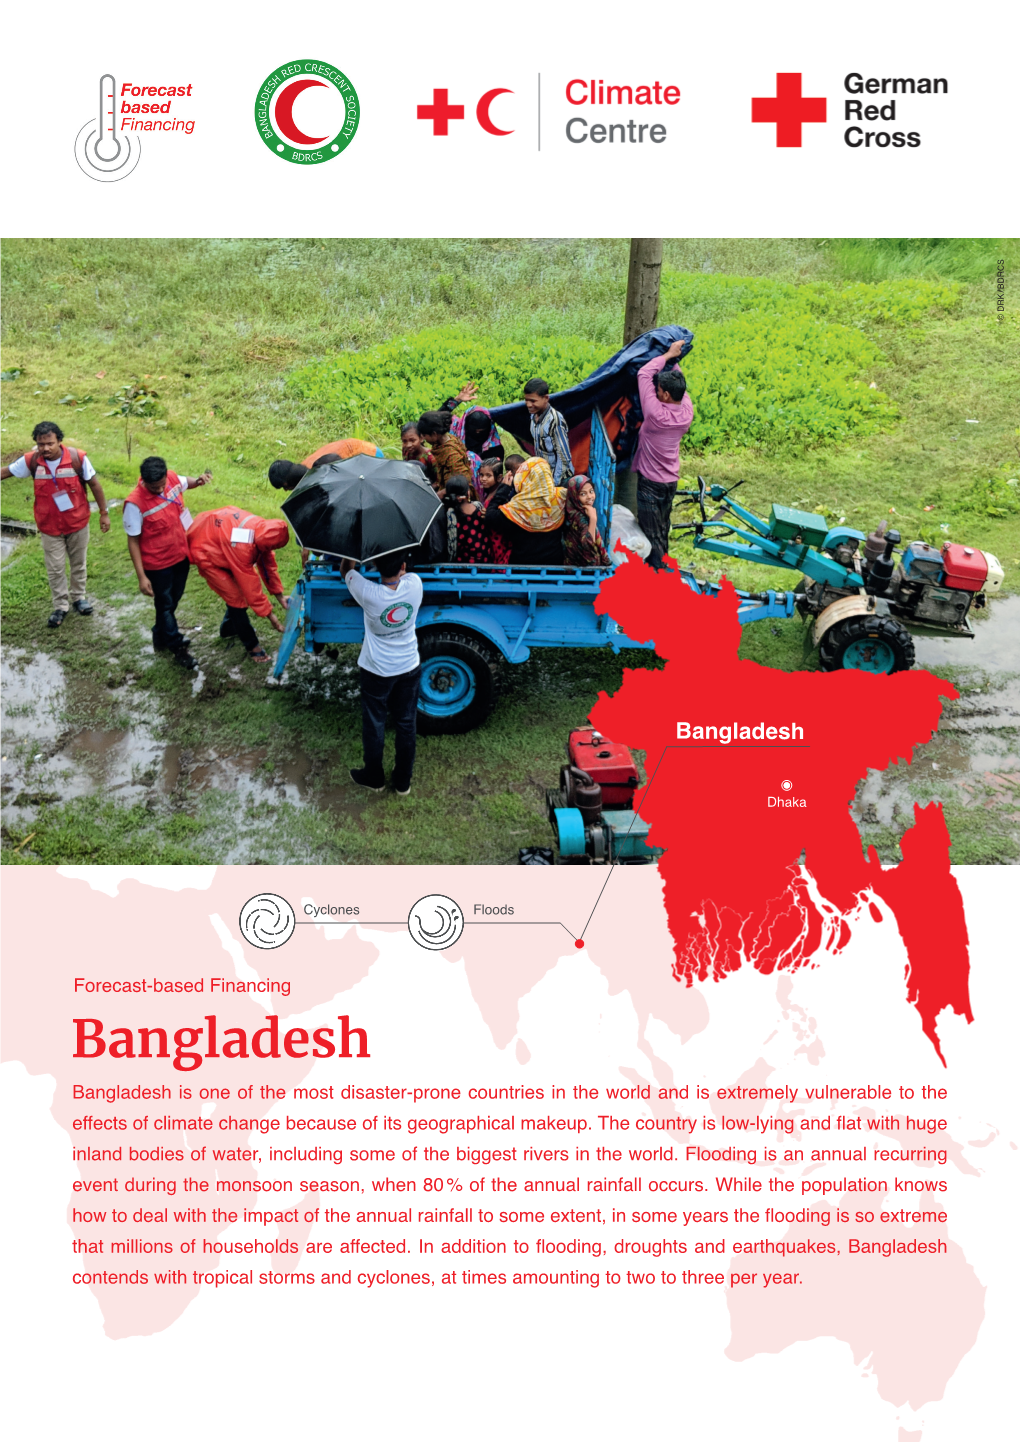 German Red Cross' and Bangladesh Red Crescent Society's Fbf Project